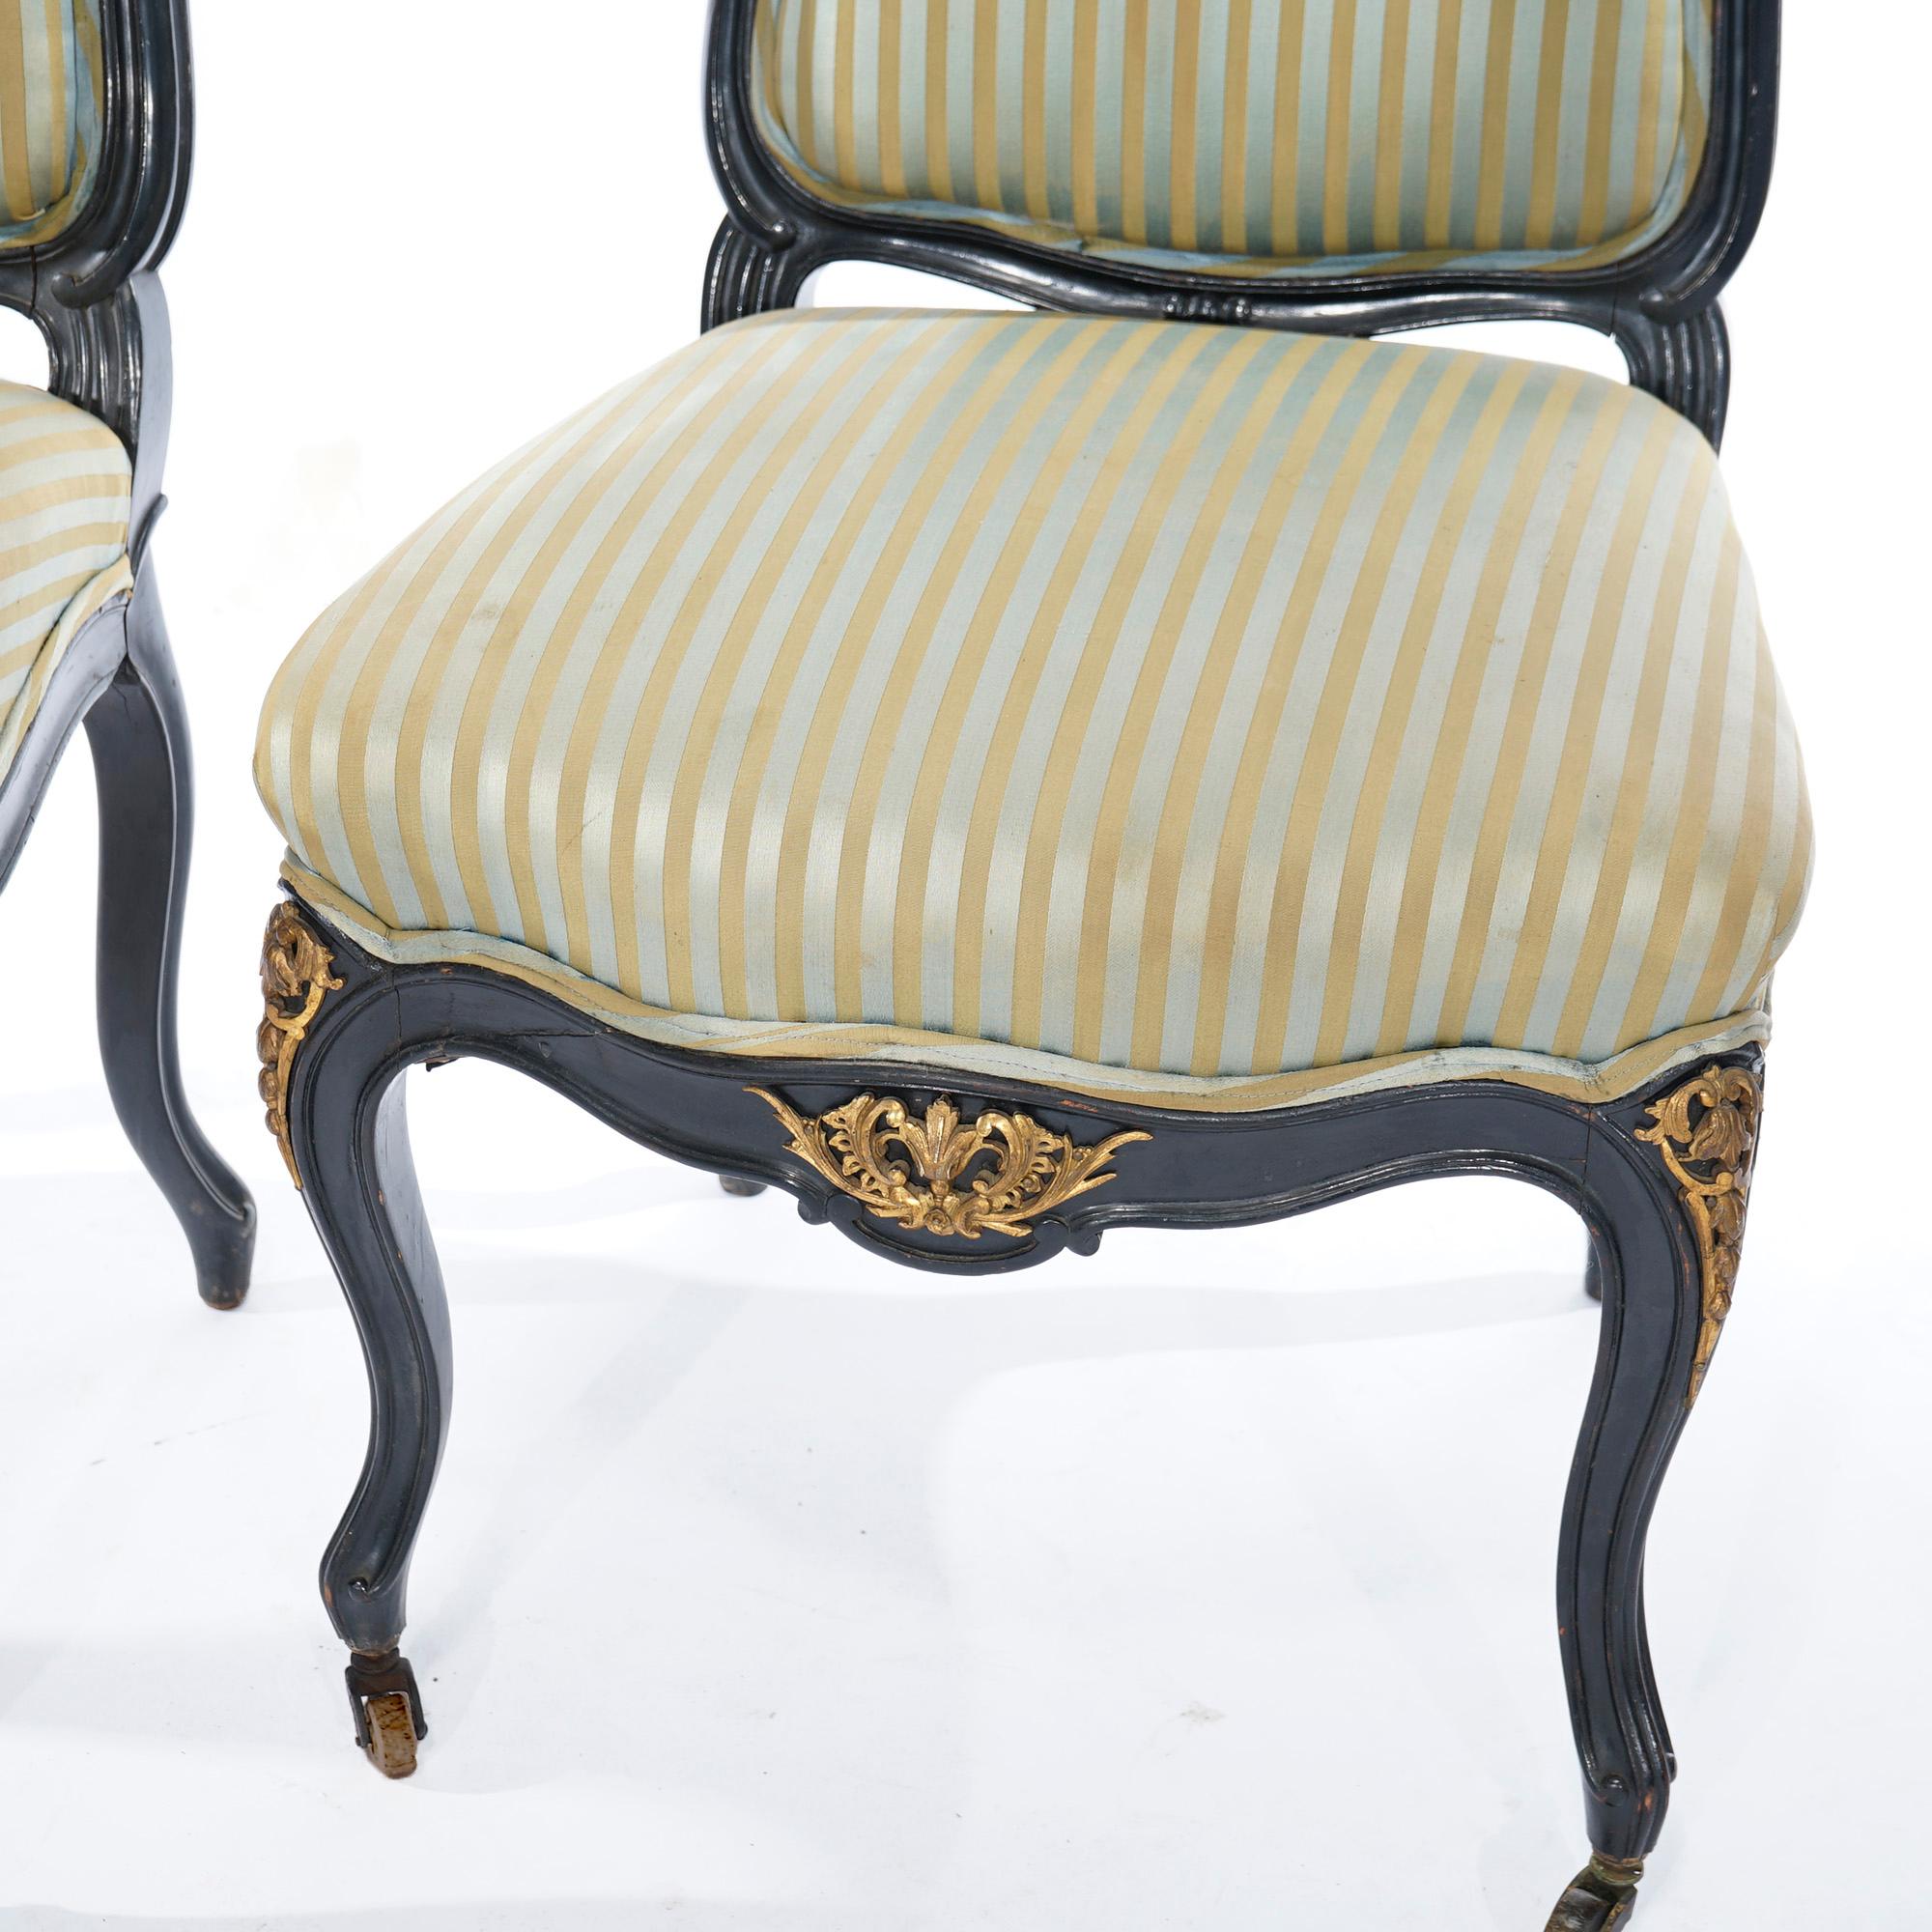 Antique French Louis XV Style Ebonized Carved Wood & Ormolu Side Chairs 20thC For Sale 5